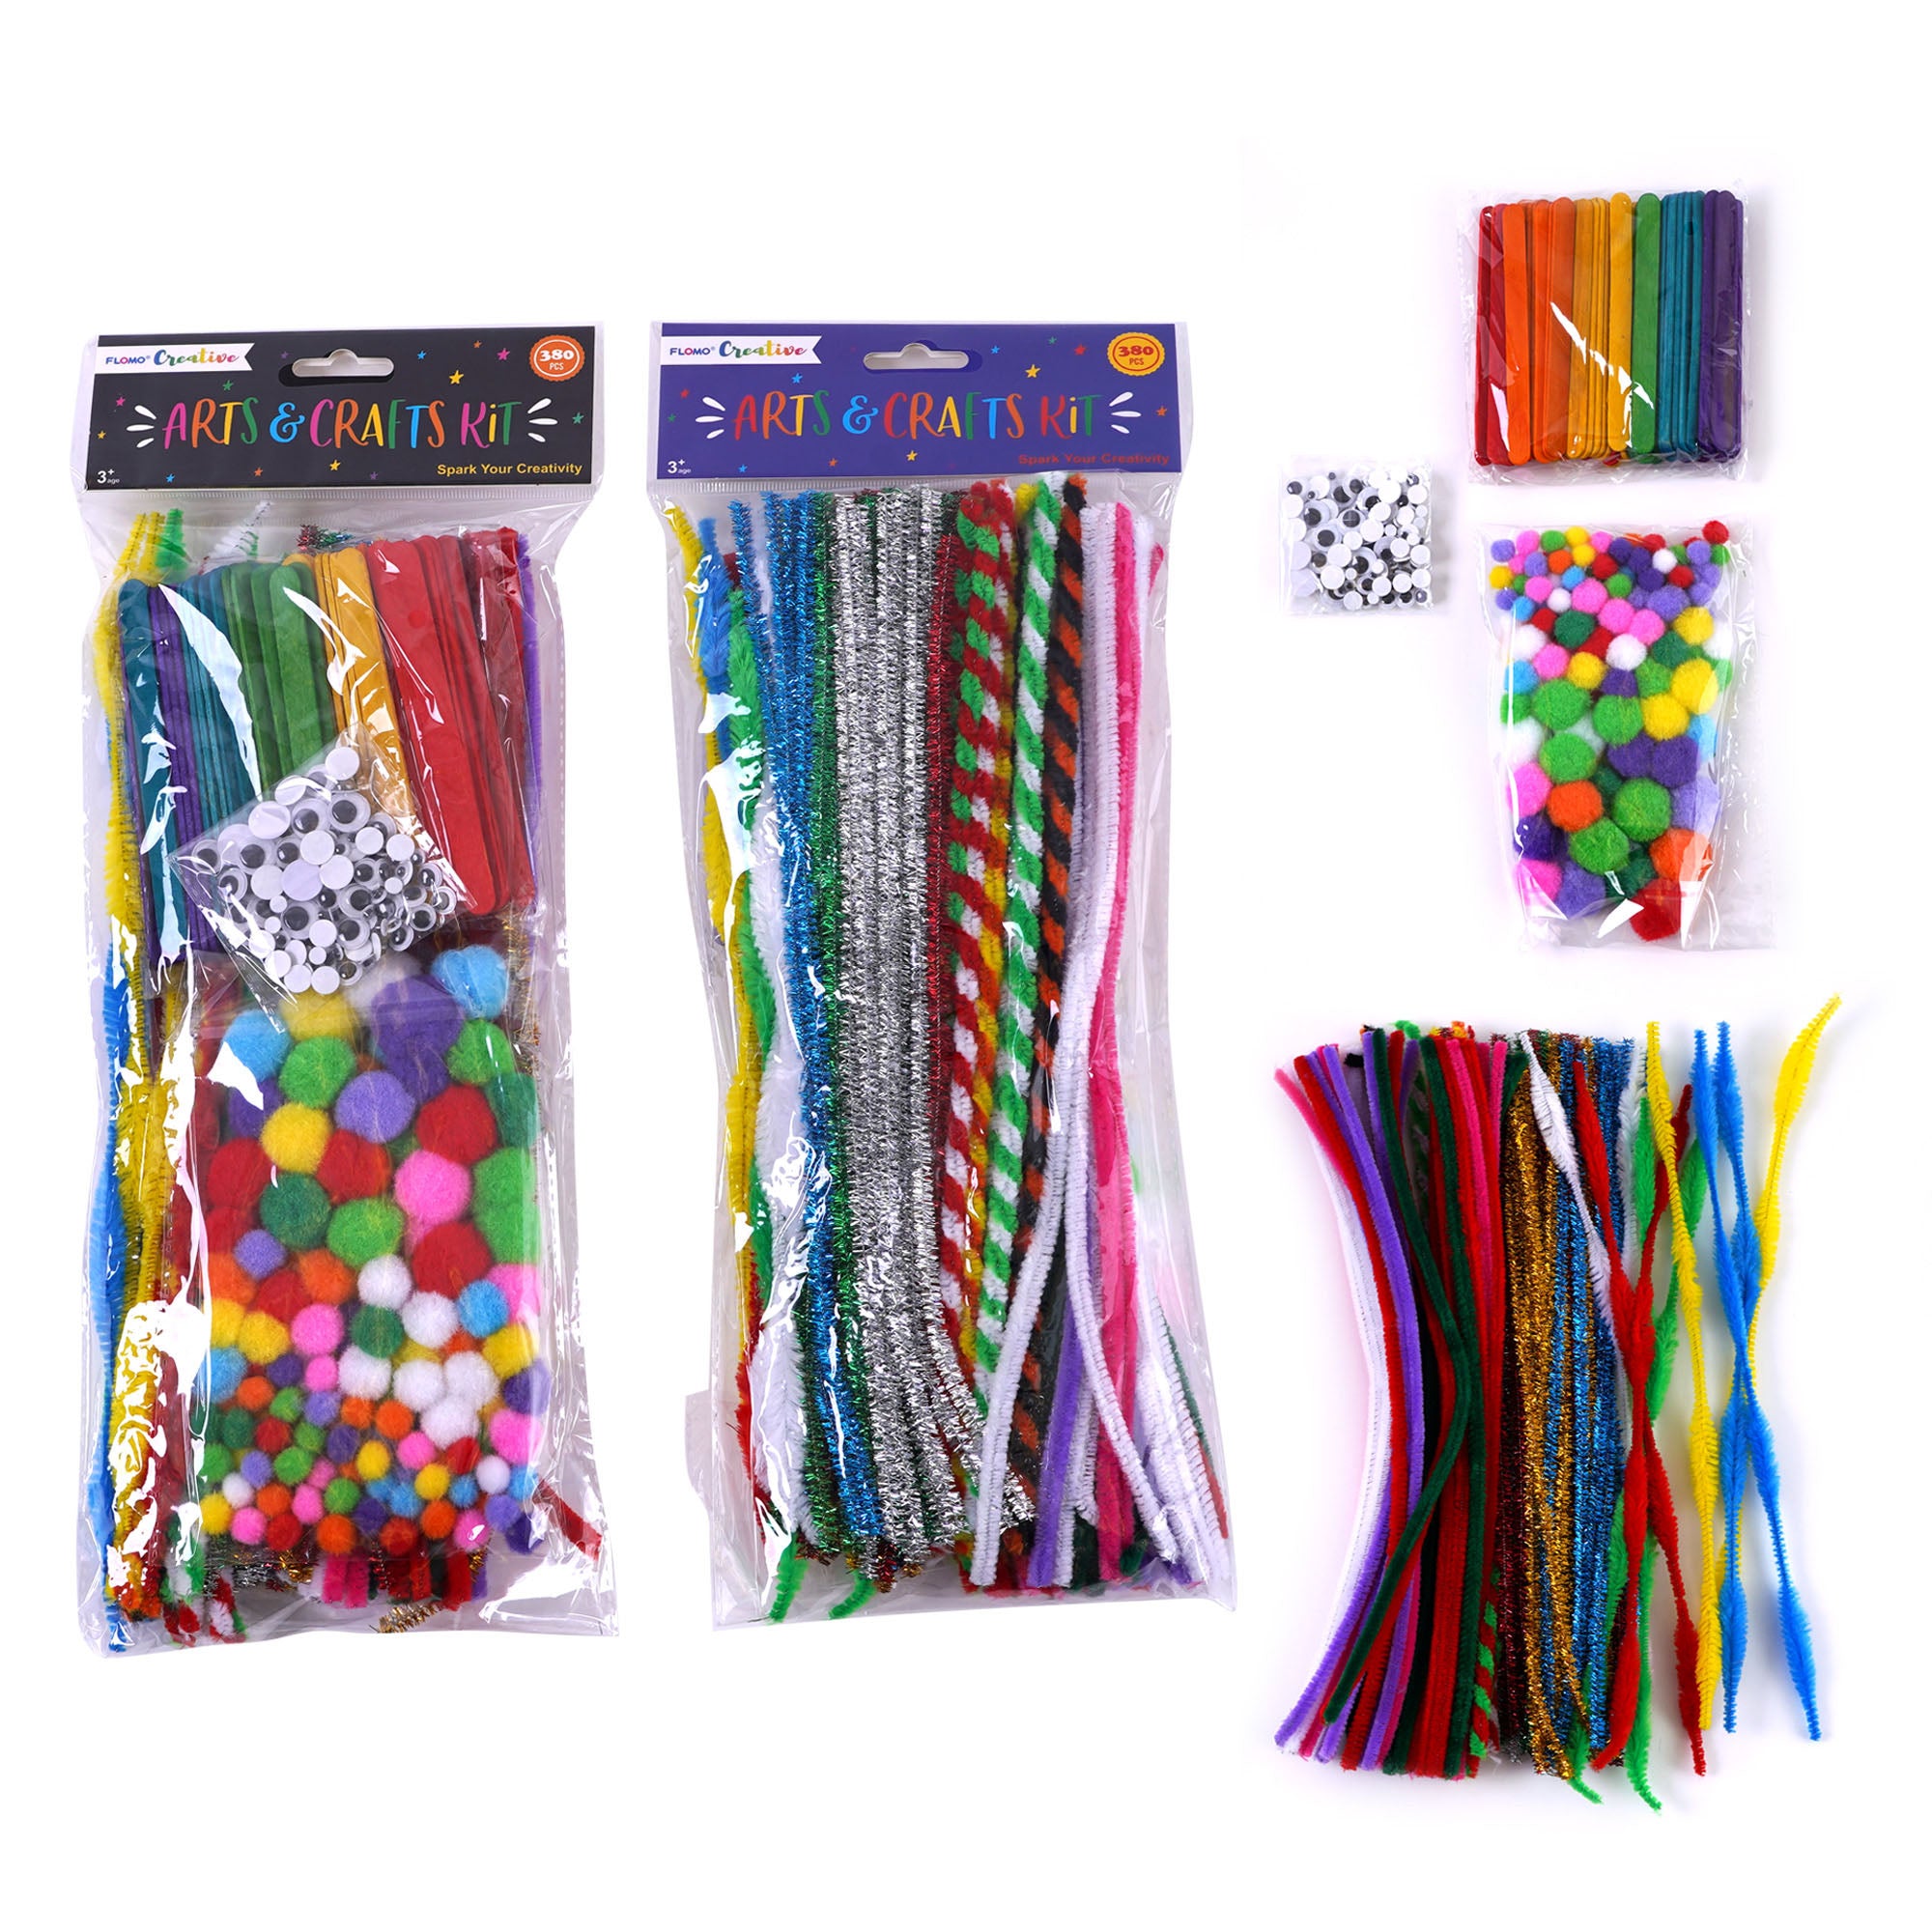 RELAX 250Pcs DIY Art Craft Kit for Kids with Yarn Chenille Pipe Cleaners Pom  Poms Ice Cream Sticks Colorful Feathers Cardboard Buttons, Poms Crafts for  Kids DIY 